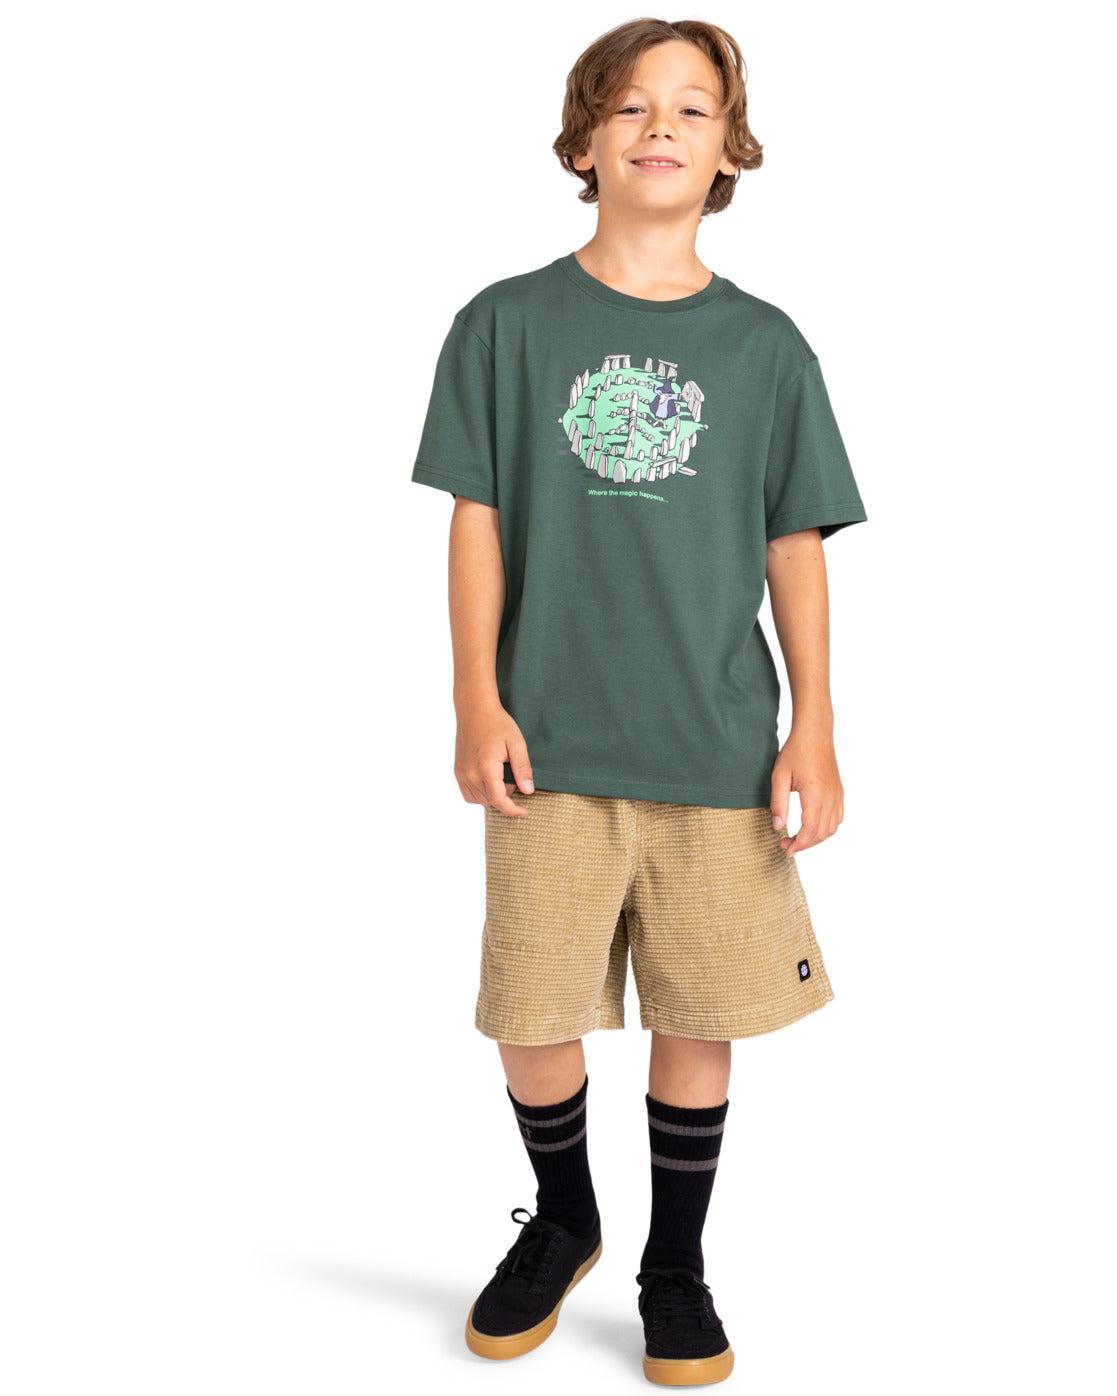 ELEMENT - MAGICAL PLACES SS YOUTH TEE - GARDEN TOPIARY